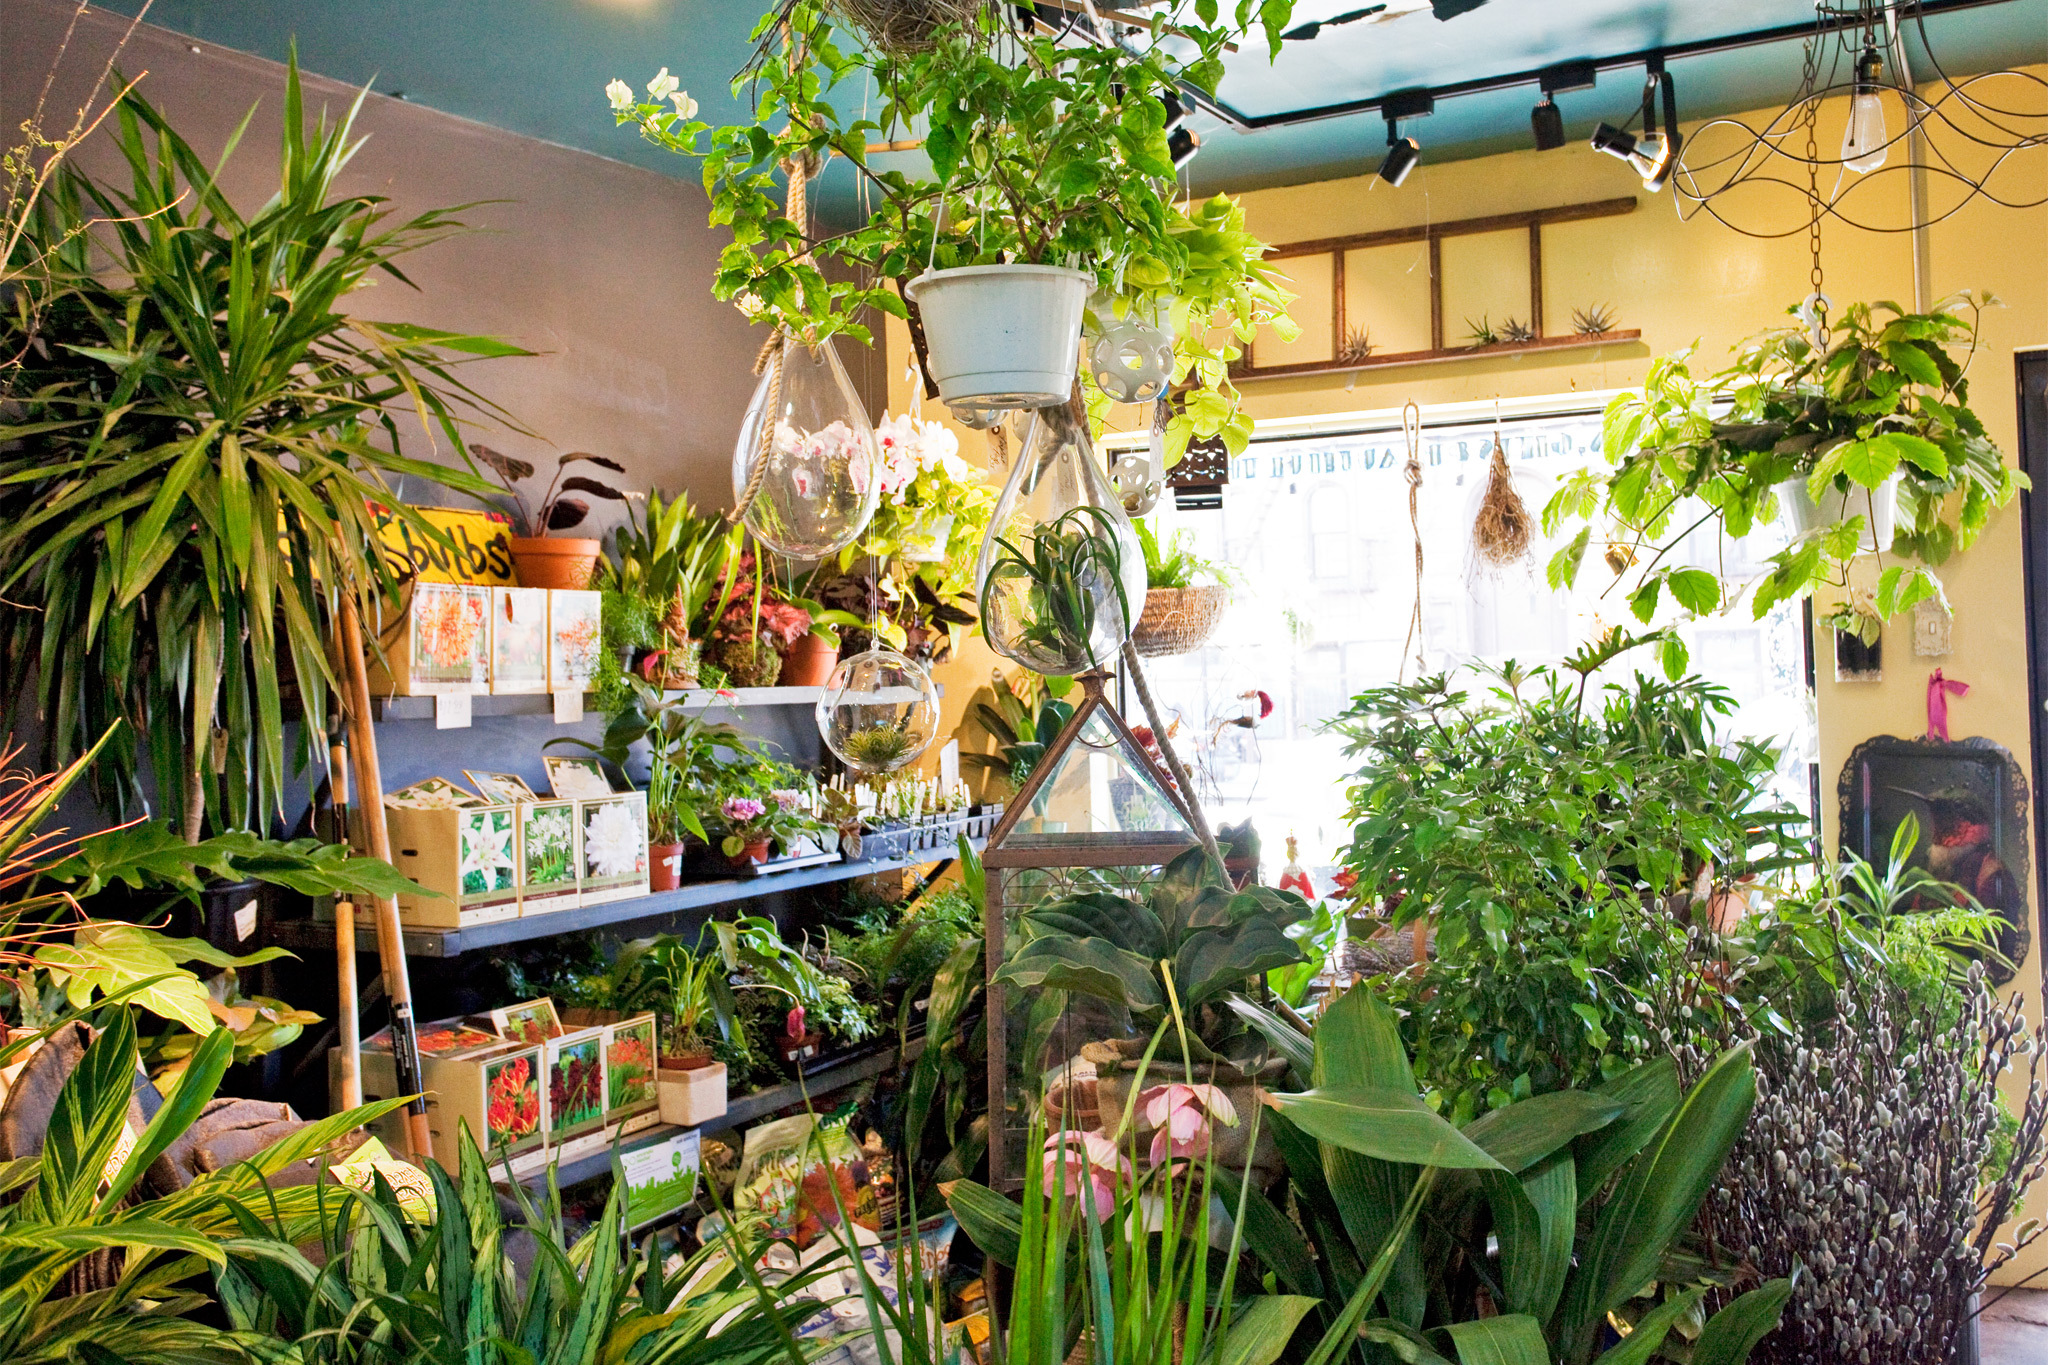 Best garden store options in NYC for plants, flowers & landscaping